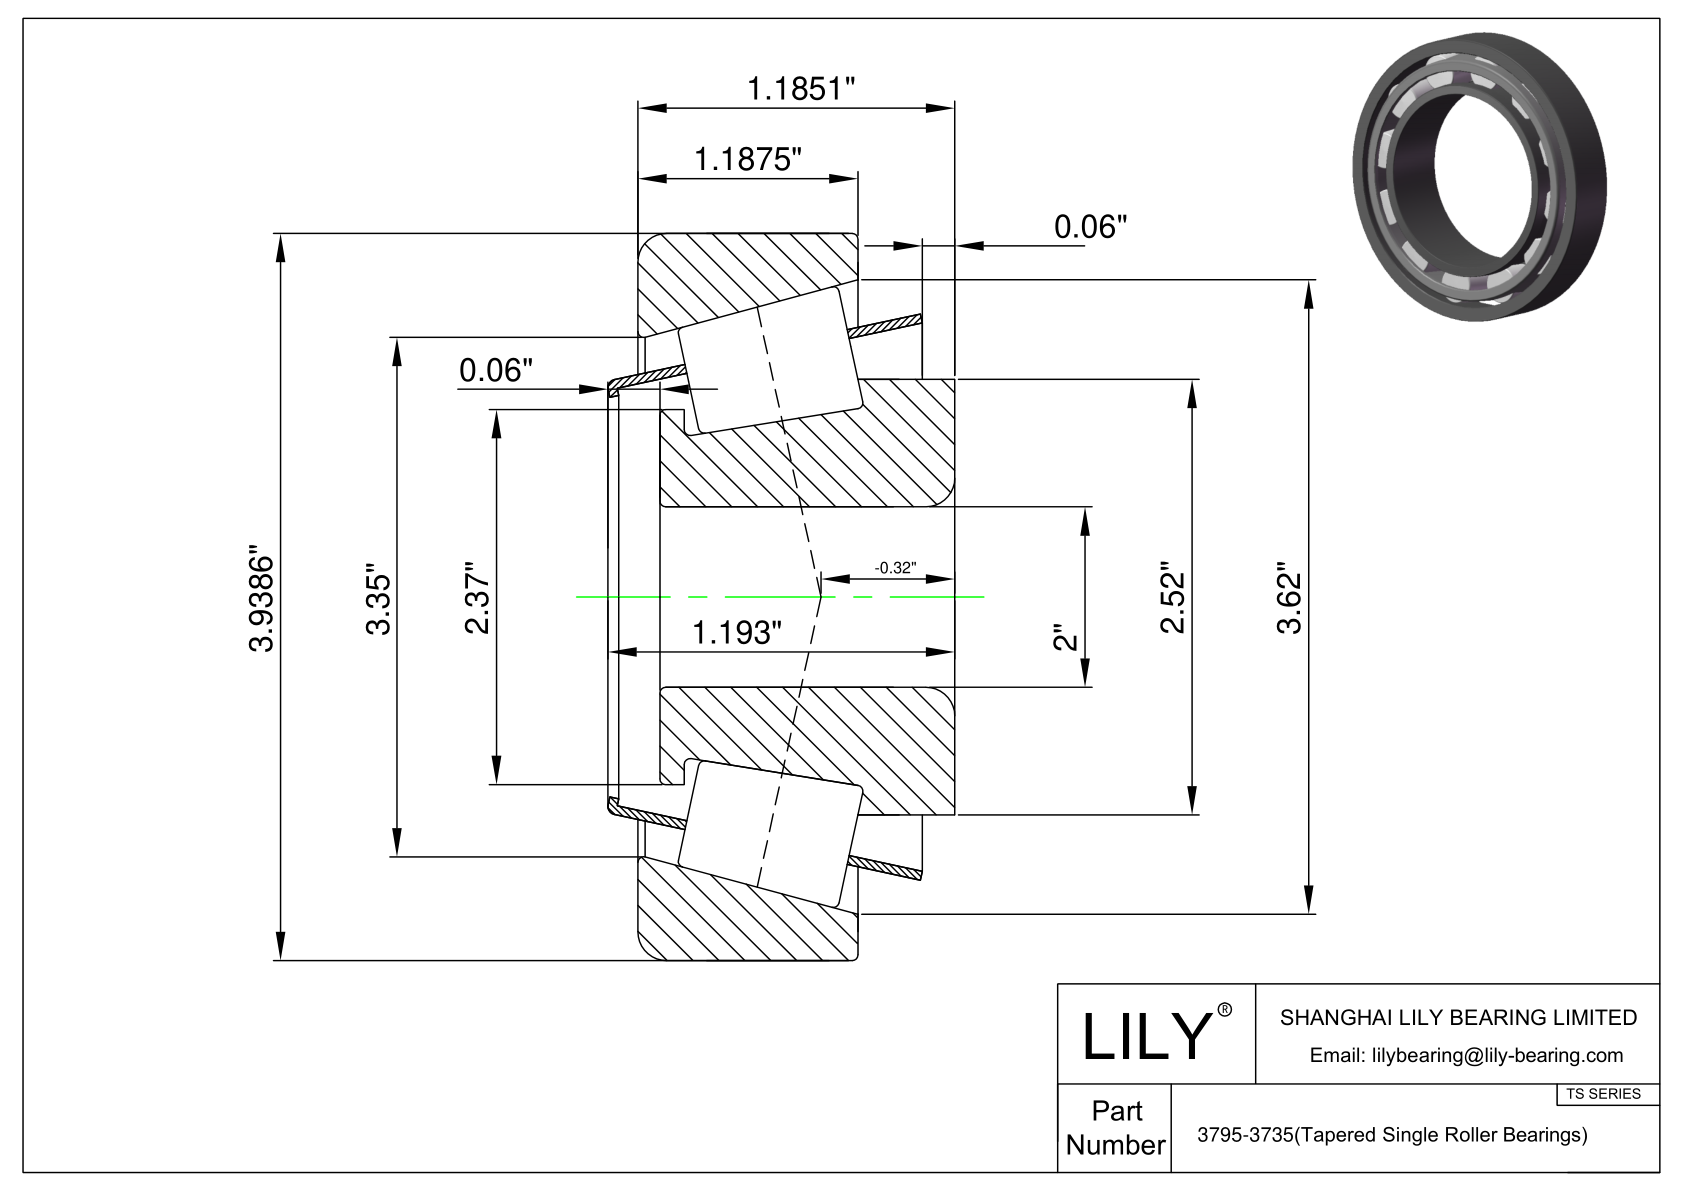 3795-3735 TS (Tapered Single Roller Bearings) (Imperial) cad drawing